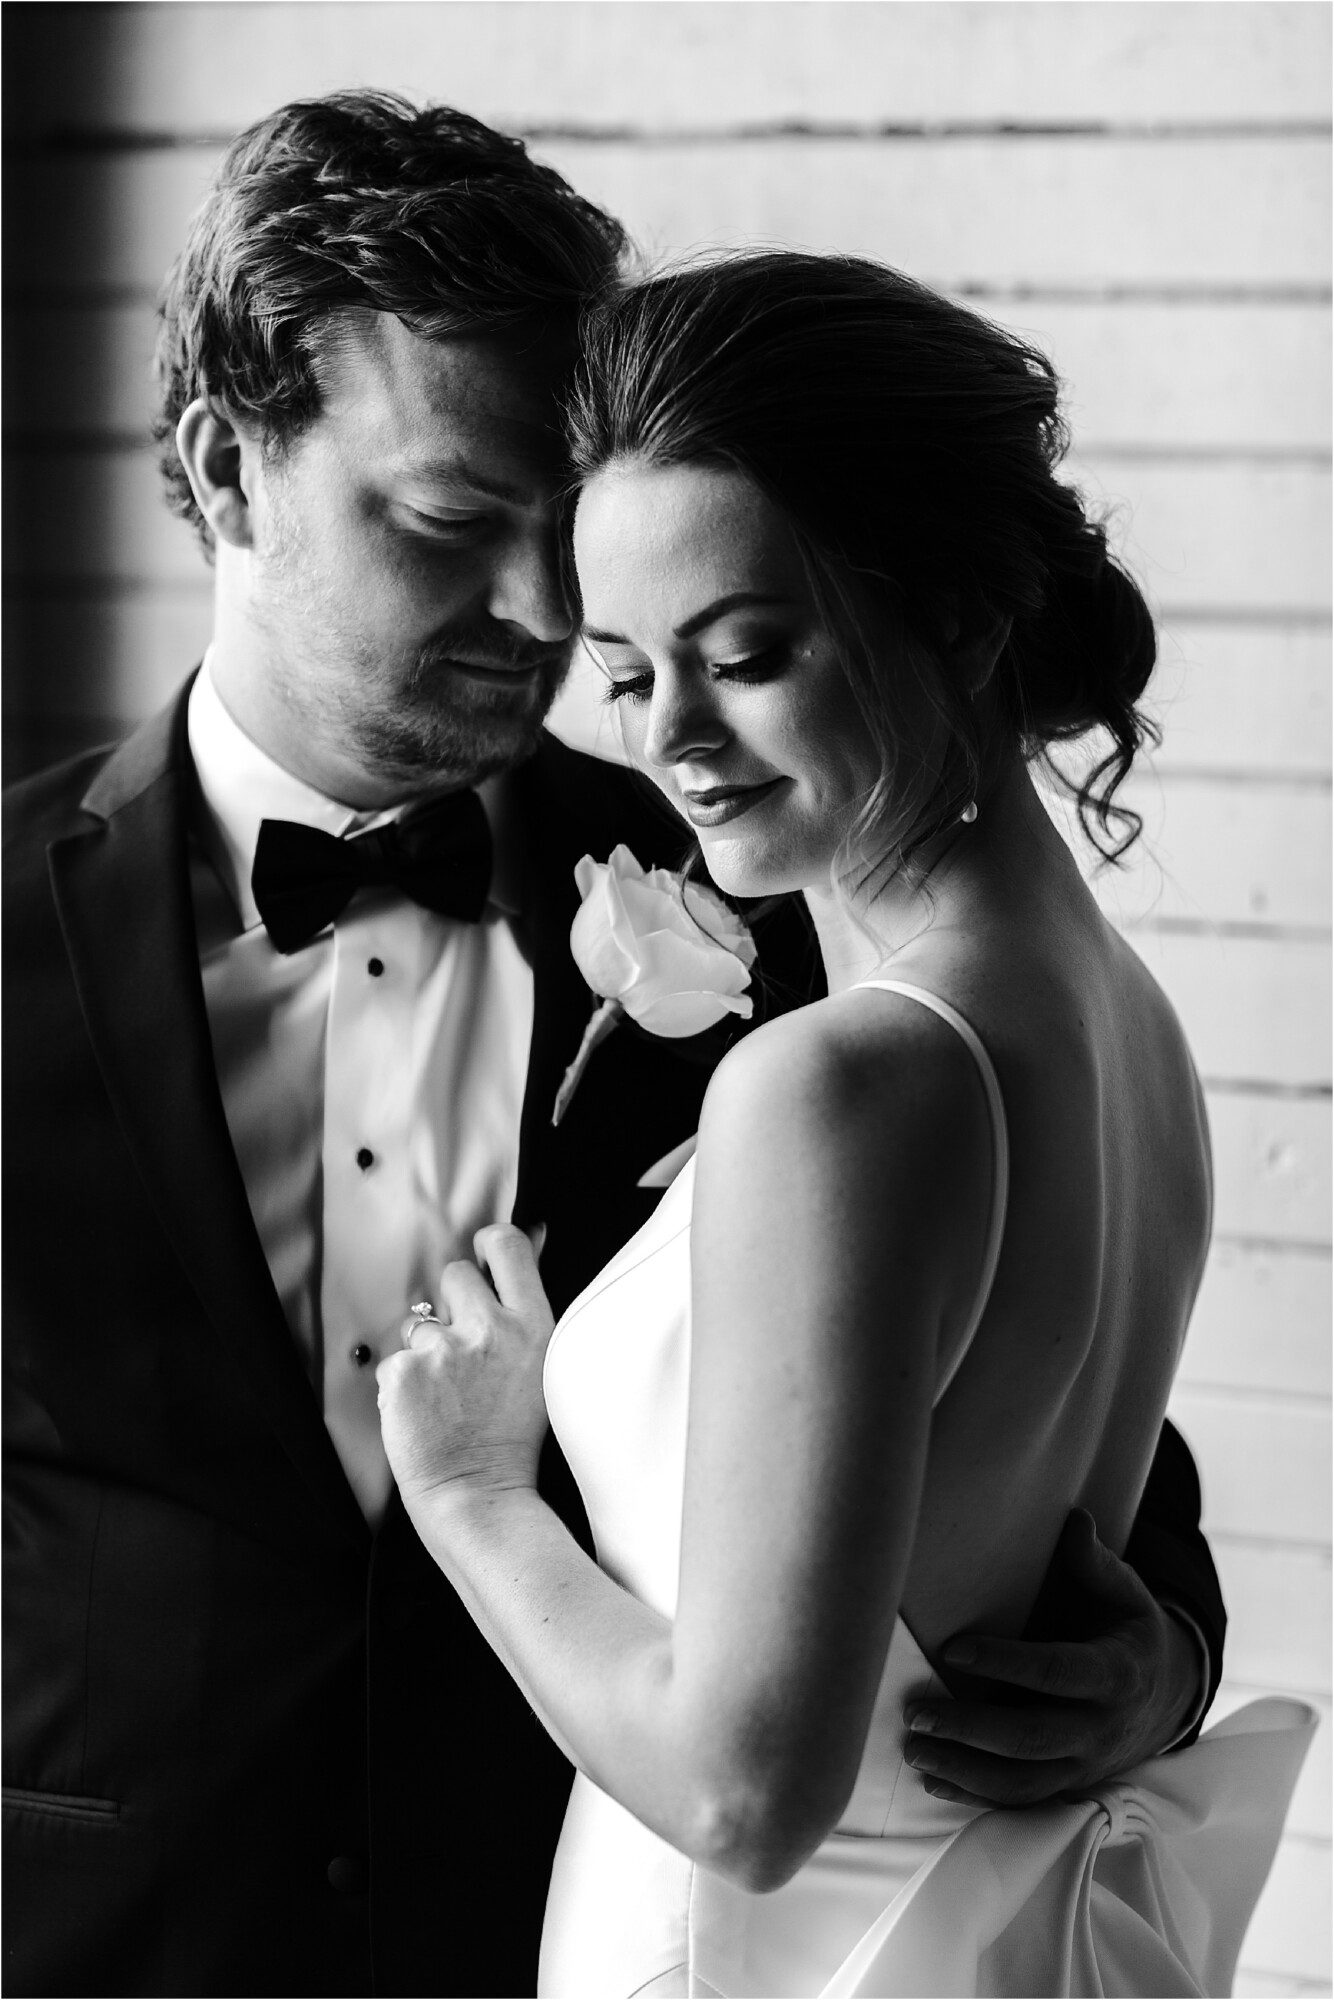 black and white portrait photo of bride and groom